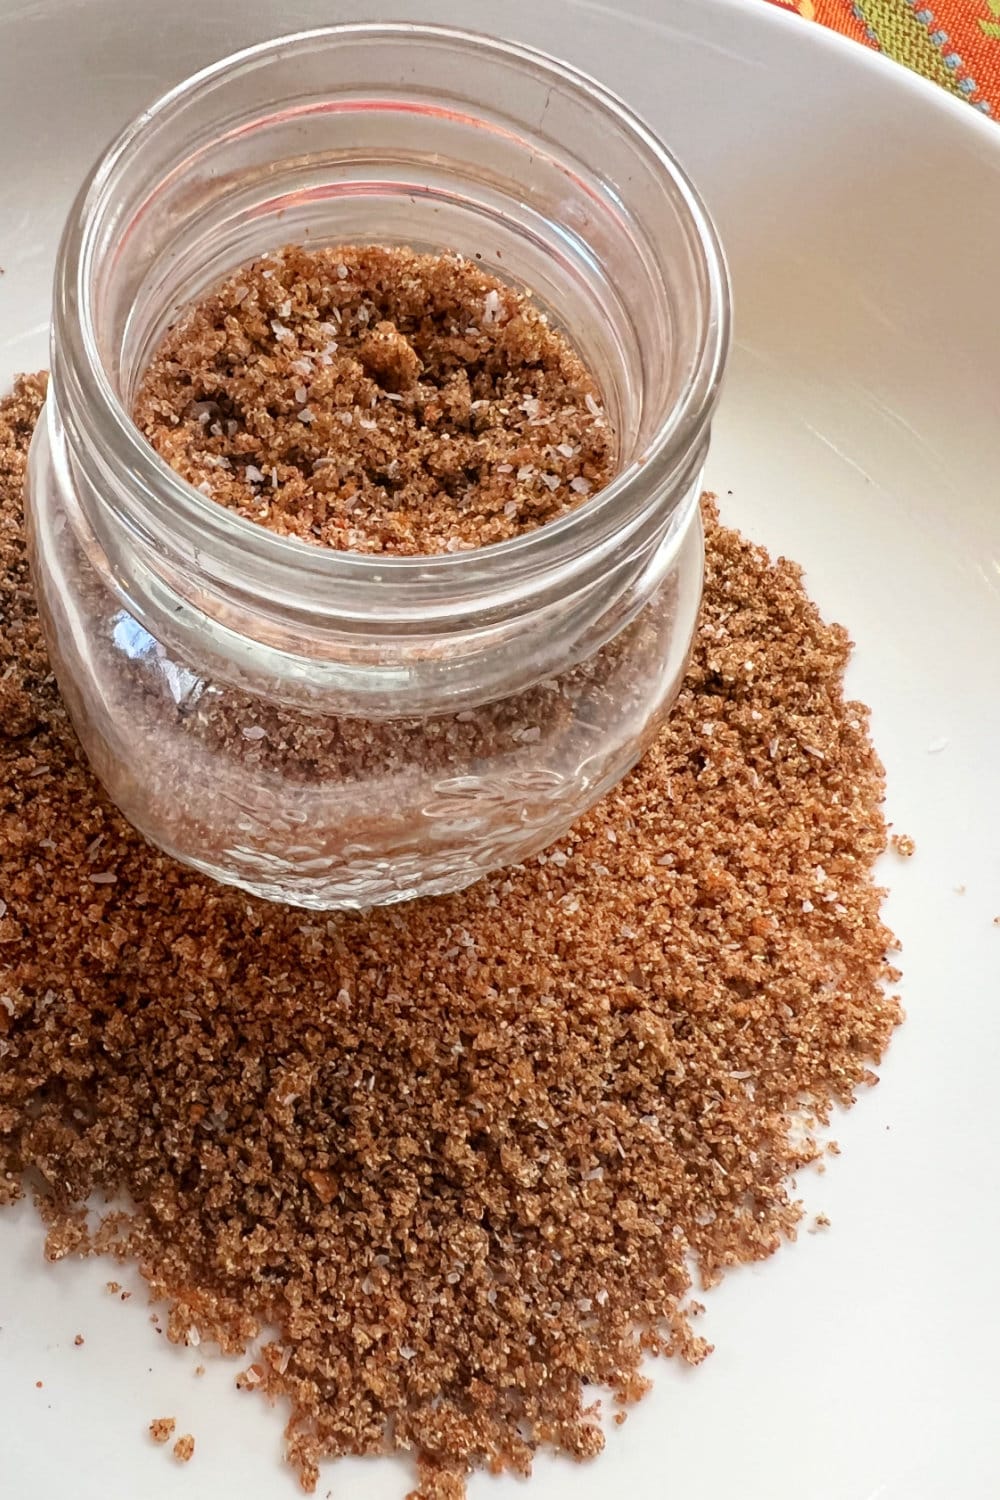 A jar of beef tenderloin rub resting in a mound of the same rub.